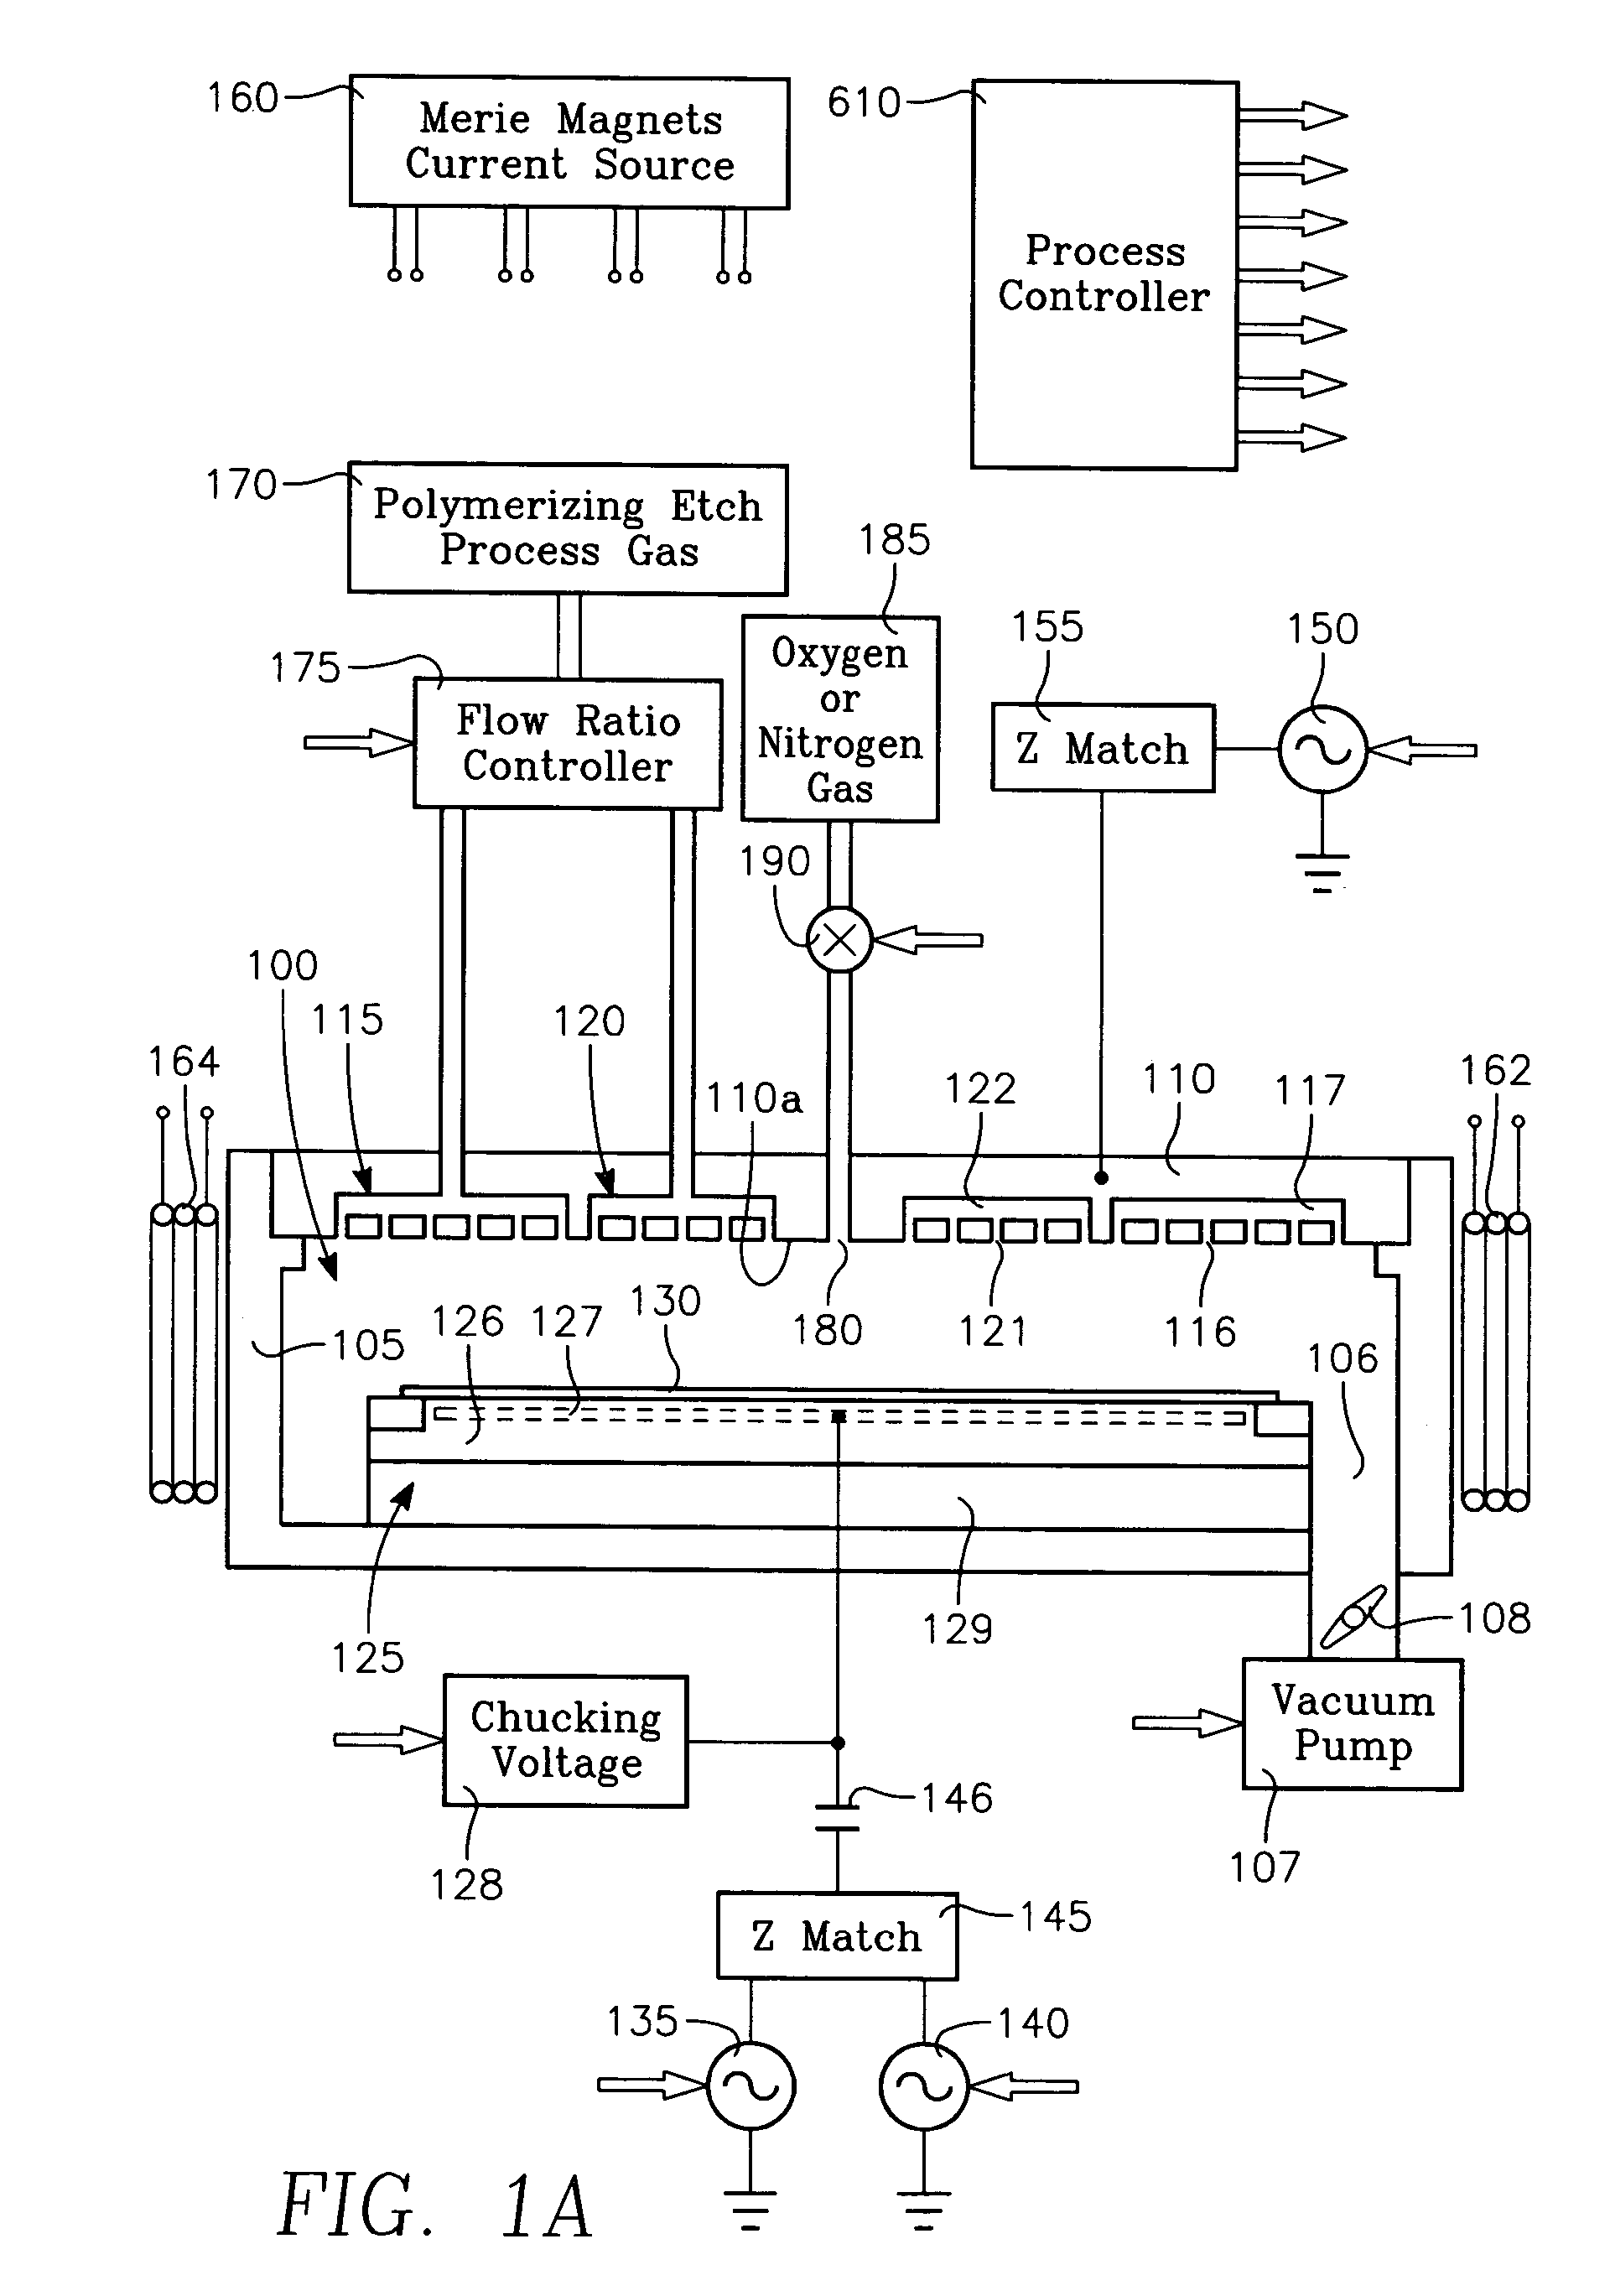 Plasma etch process using polymerizing etch gases with different etch and polymer-deposition rates in different radial gas injection zones with time modulation